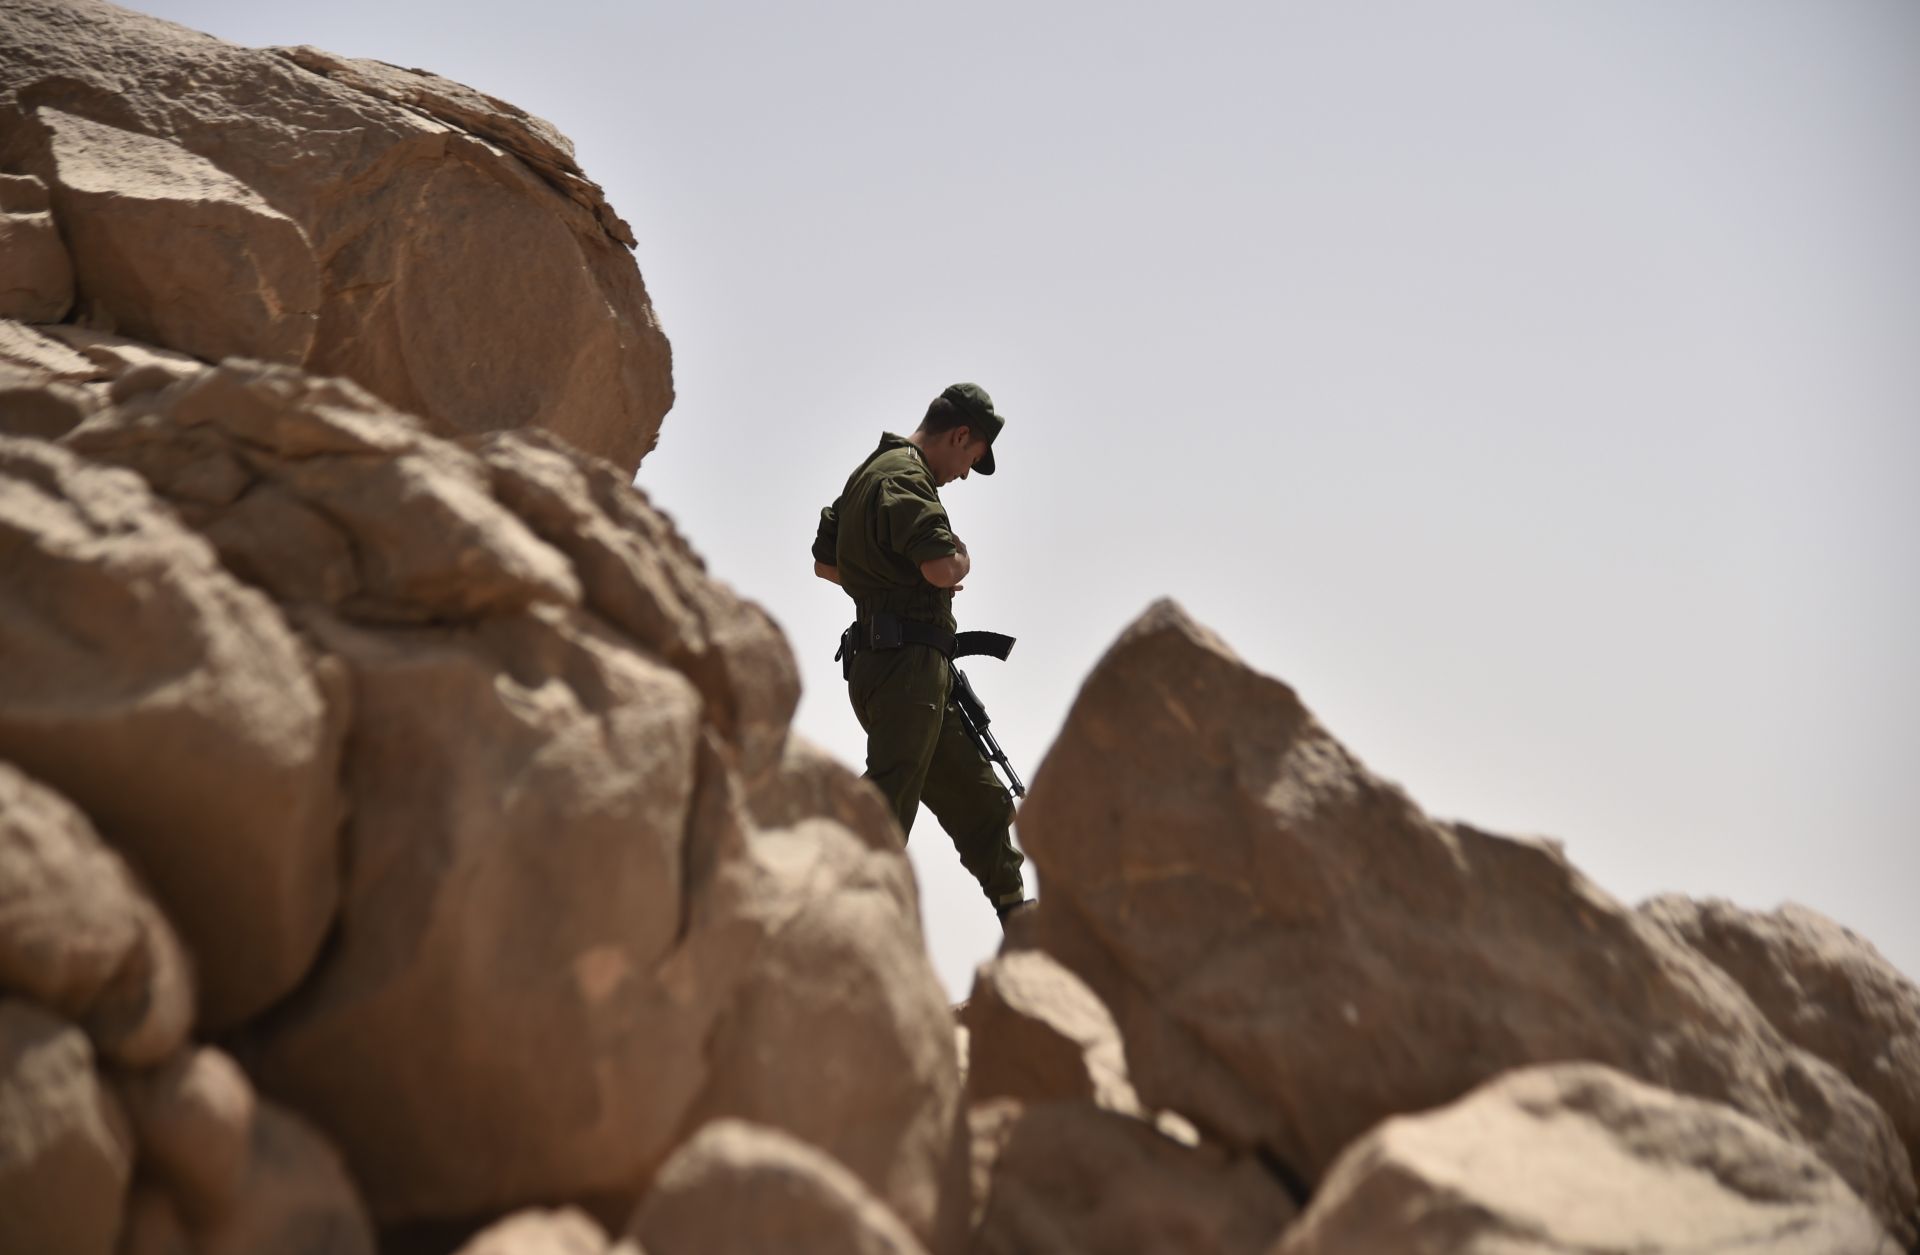 An Algerian soldier on patrol in the Tamanrasset Desert south of Algiers.